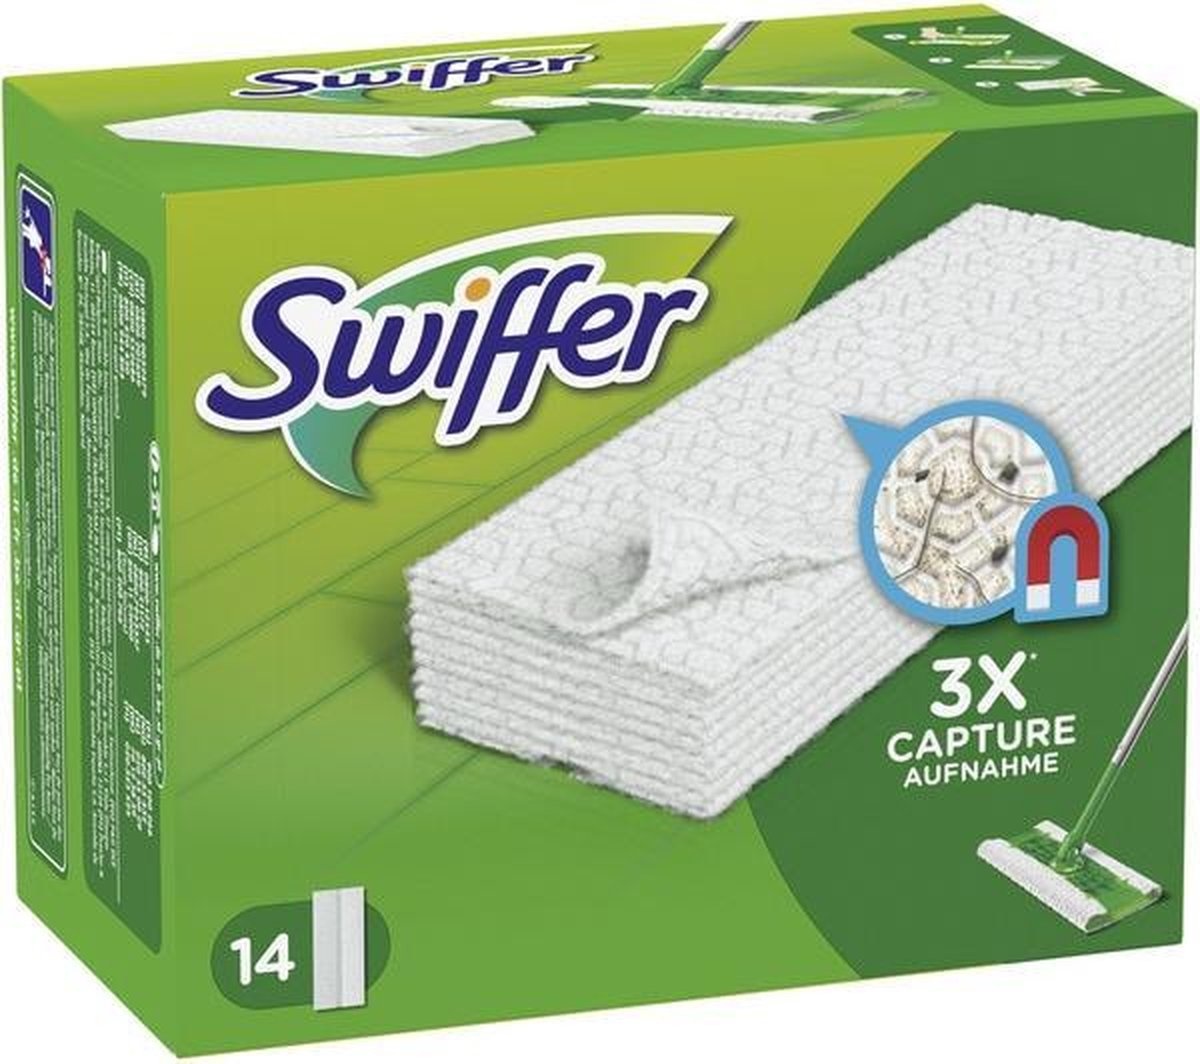 Swiffer Floor Cleaner - 14 Pieces - Refill Dust Cloths